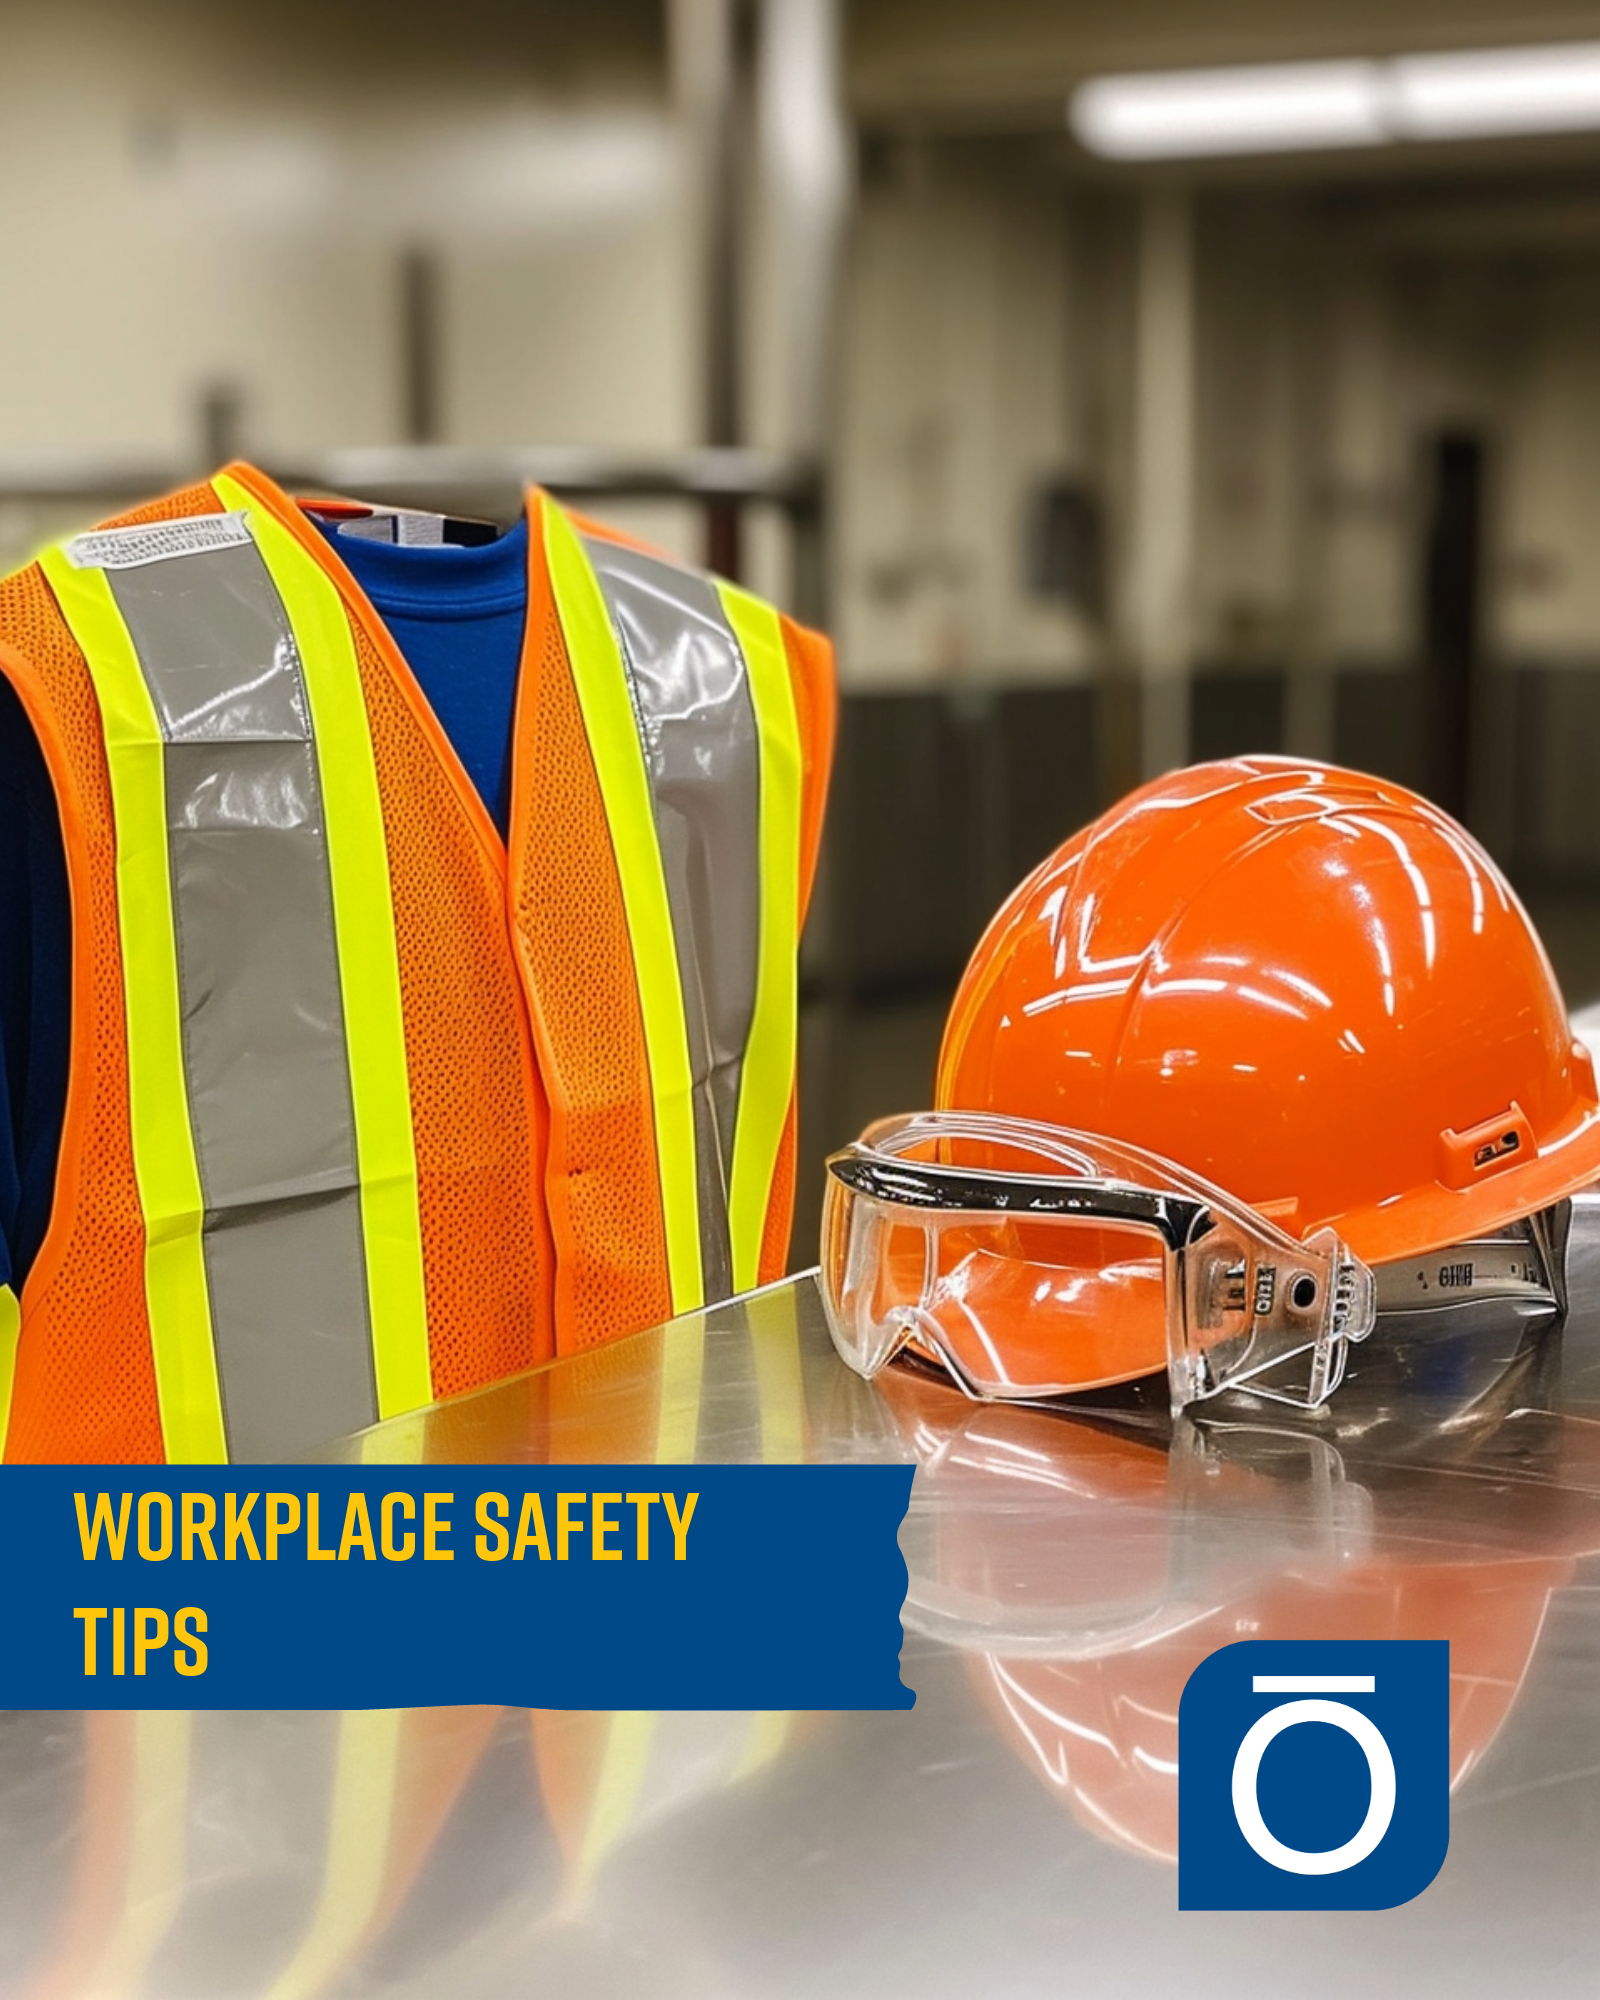 Safety vest, hard hat, and protective goggles on a table, essential gear for workplace safety.